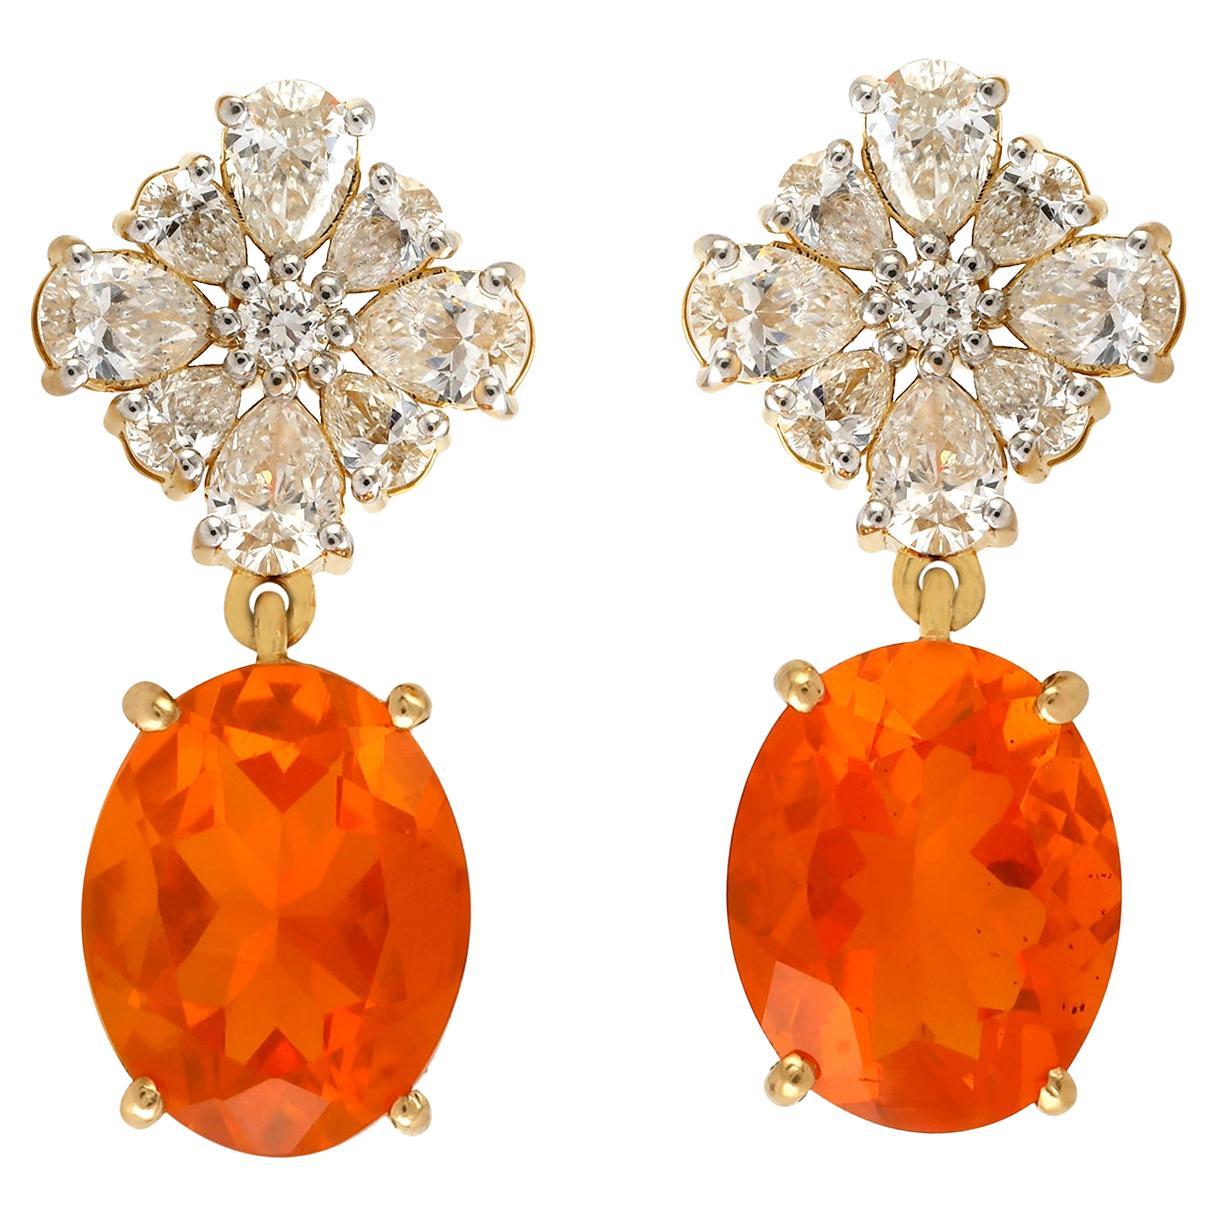 Oval Shaped Fire Opal Dangle Earrings Accented With Diamonds In 18k Yellow Gold